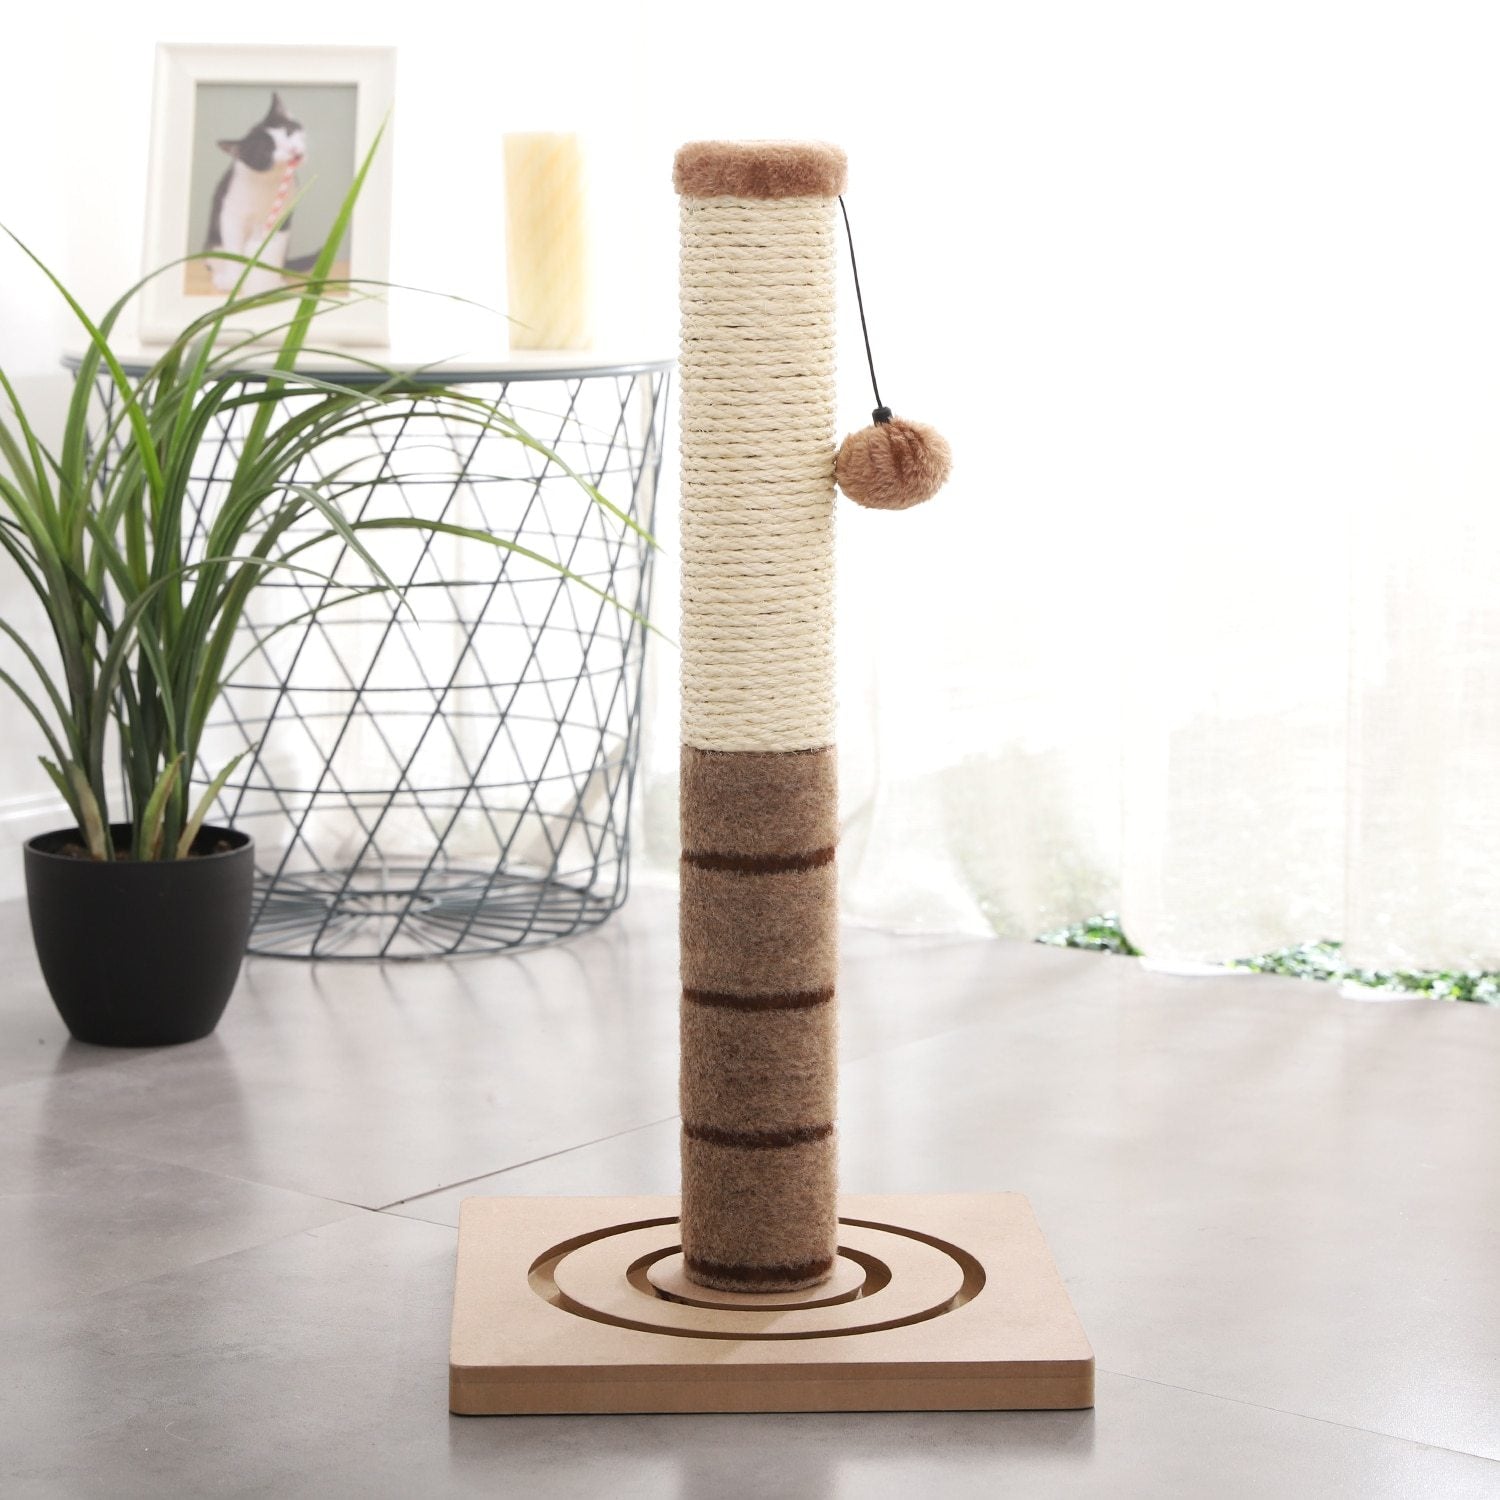 Basic Cat Scratching Post - Super Kitty Cats - 33006031-blue-29-5x29-5x56-united-states